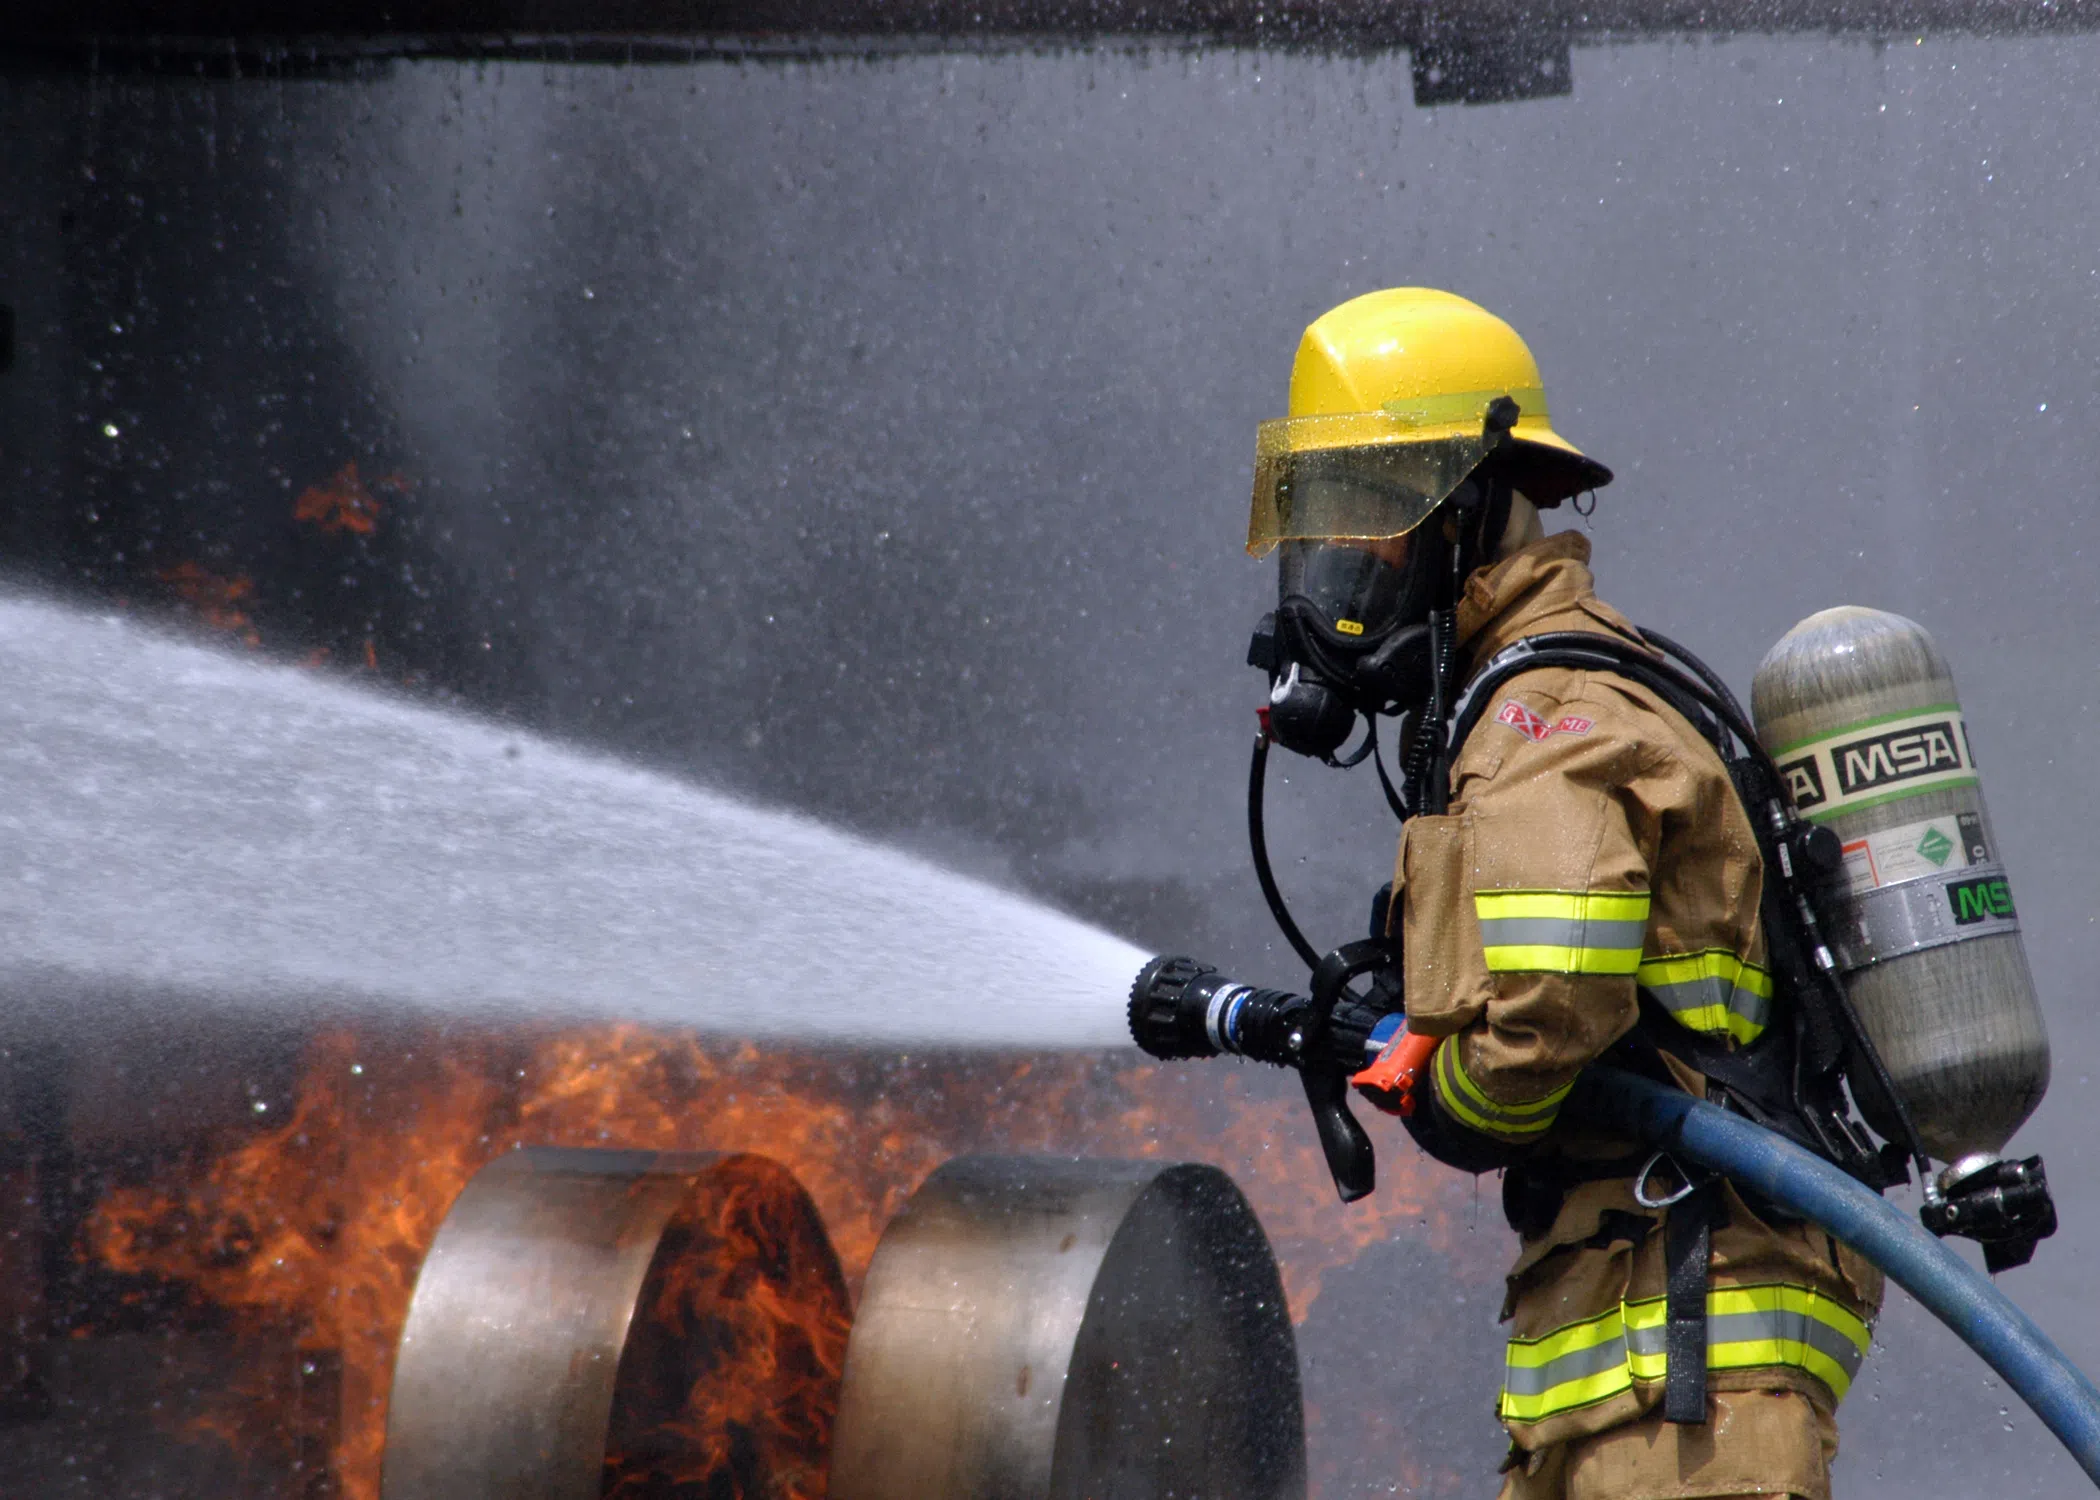 NB Firefighters Attend Premiere Training Event